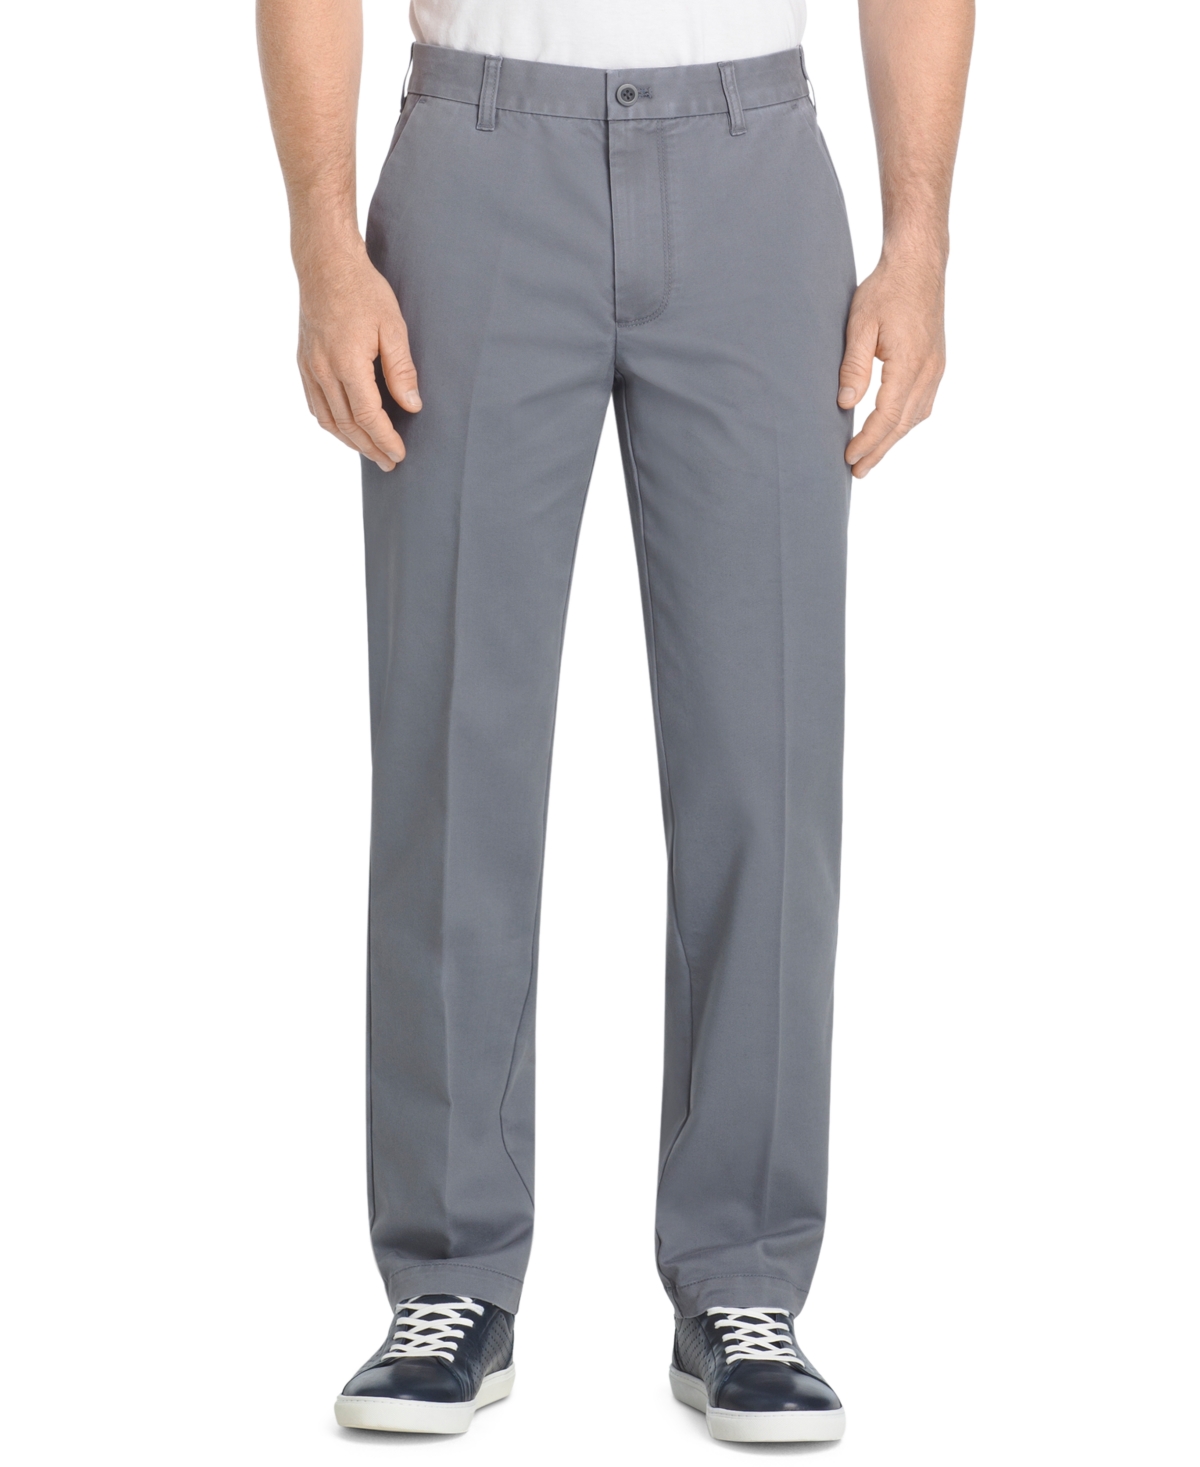 Men's Straight-Fit Performance Chino Pants - Smoked Pearl